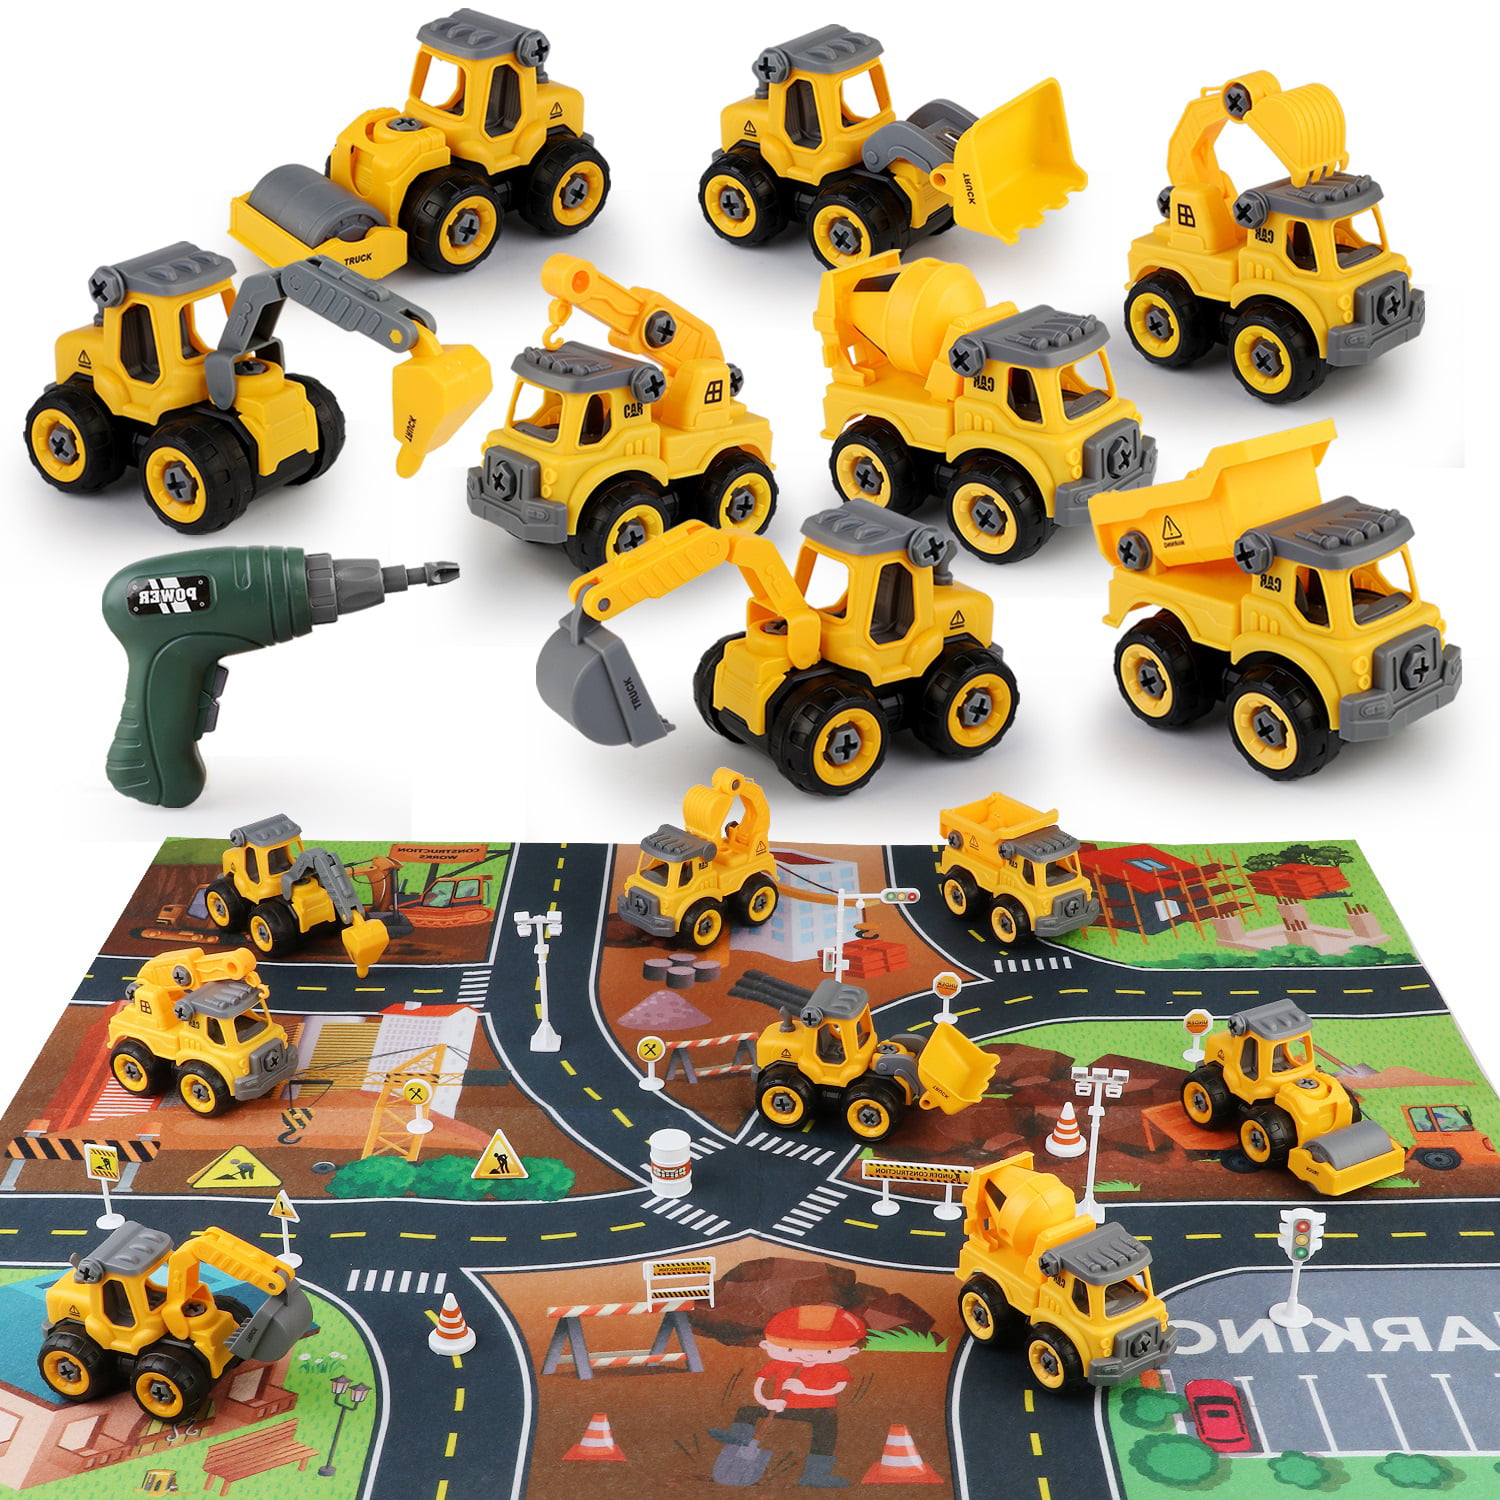 Take Apart Digger Toddler Kids Toys for 3 4 5 6 7 Year Old Boys Gifts Trucks Construction Car Stem Building Toys with Play Kit Screwdrivers Engineering Set Drill Toys